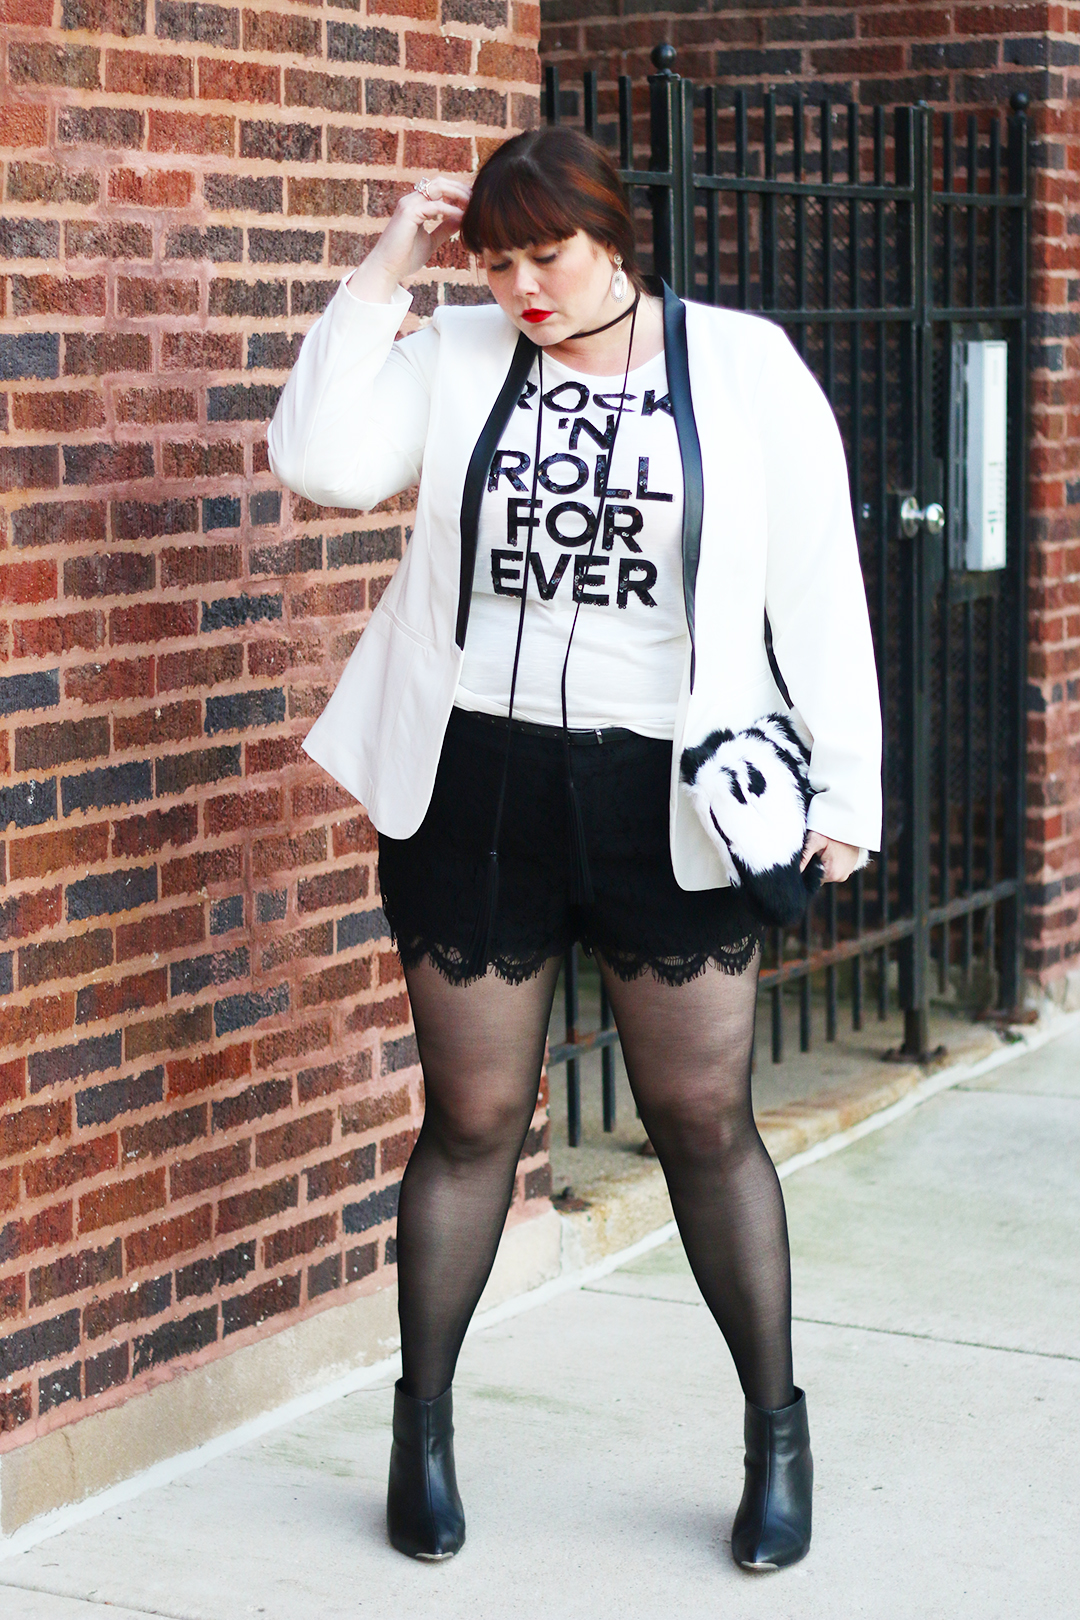 Plus Size Holiday Looks from Torrid: Rock 'n Roll Tshirt